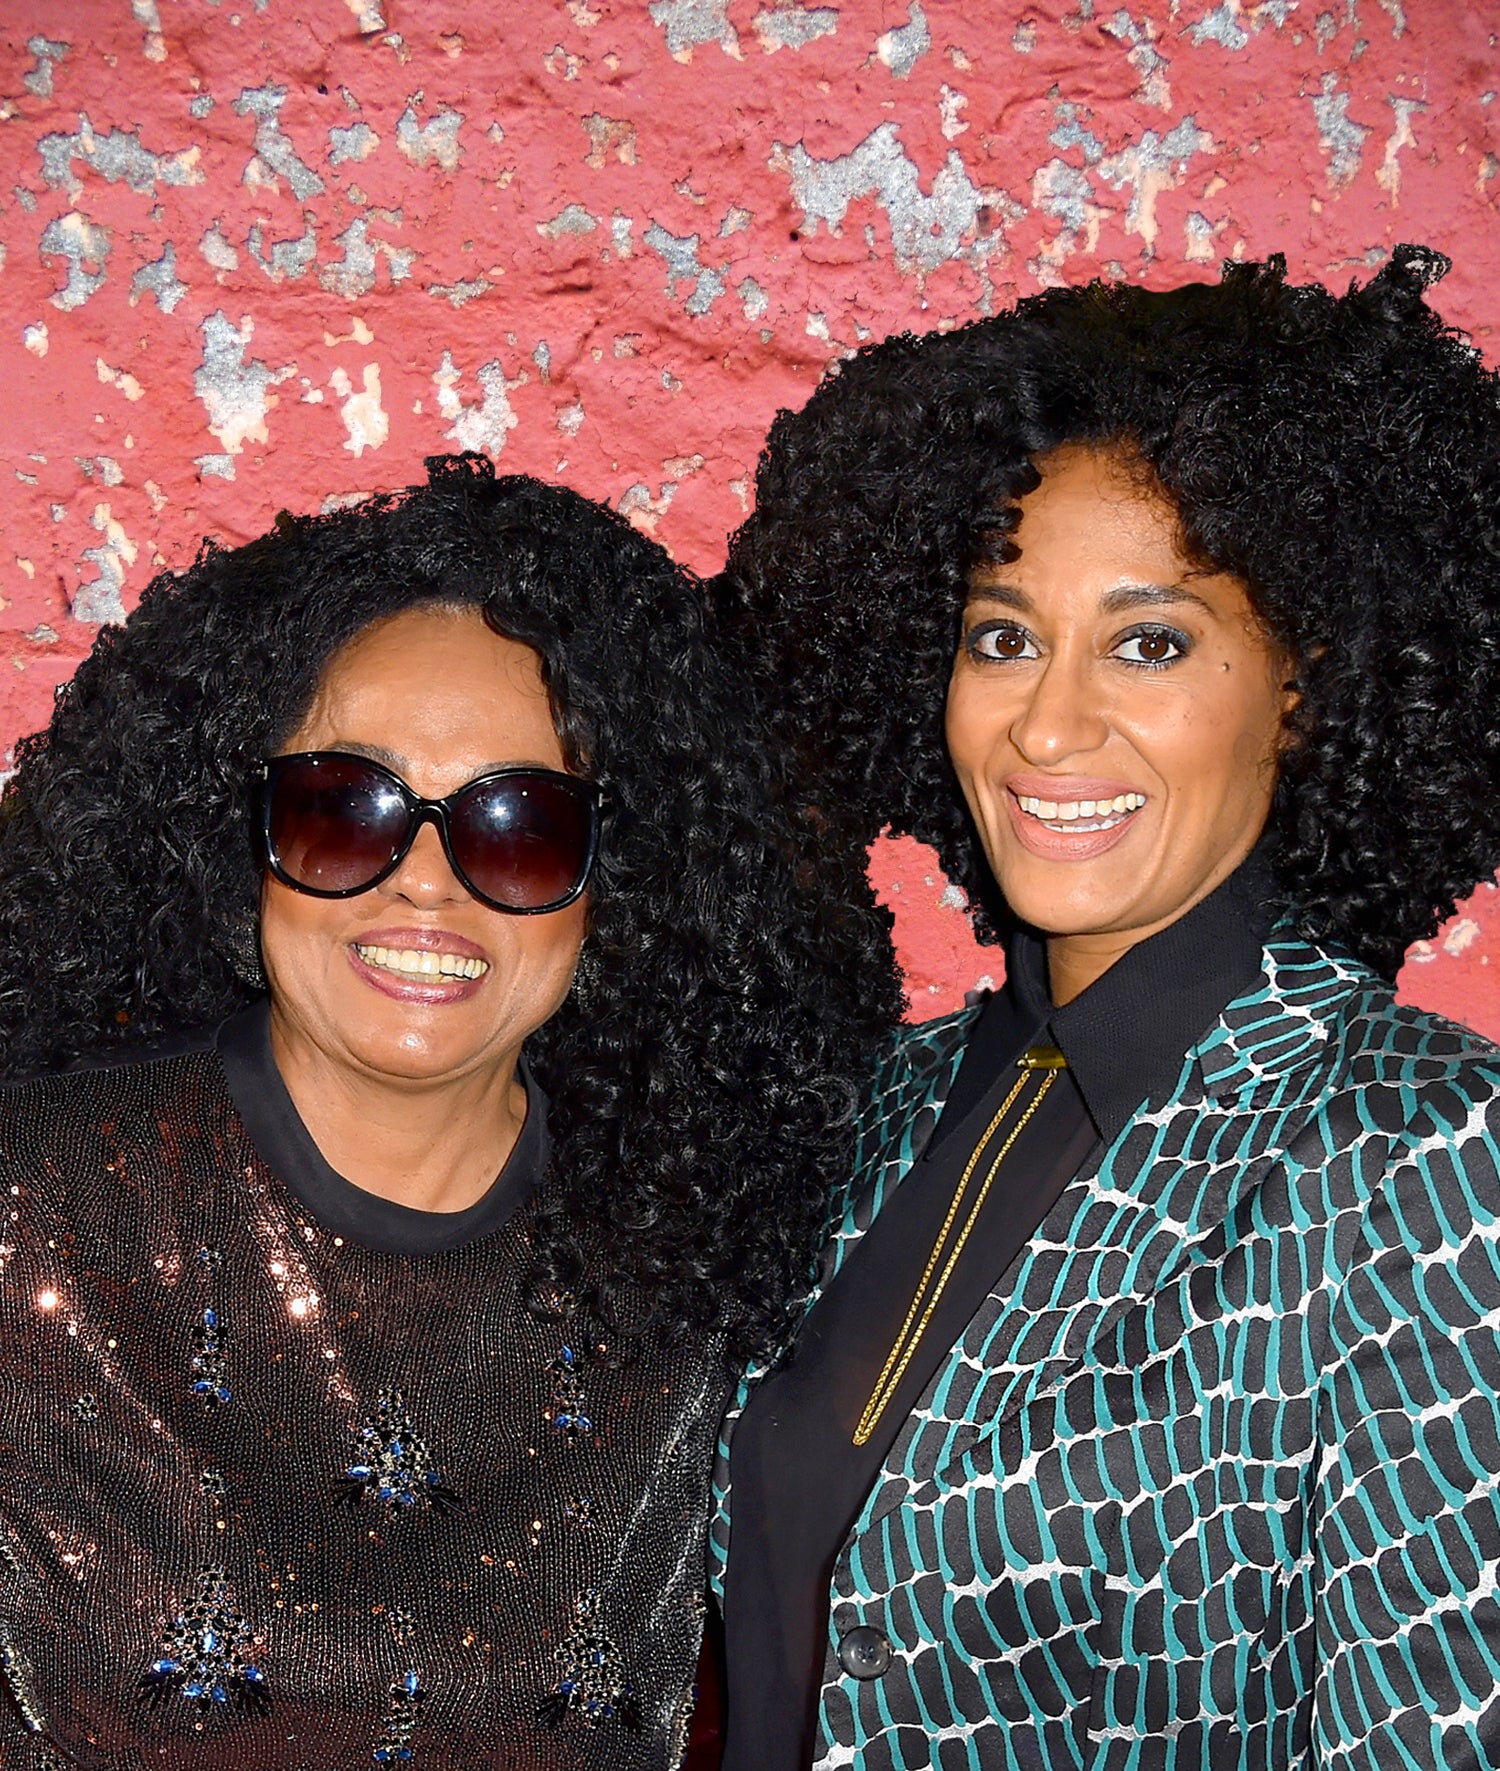 Tracee Ellis Ross Is So Proud Of Her Mom's Medal Of Freedom Award That We Can't Help But Smile
